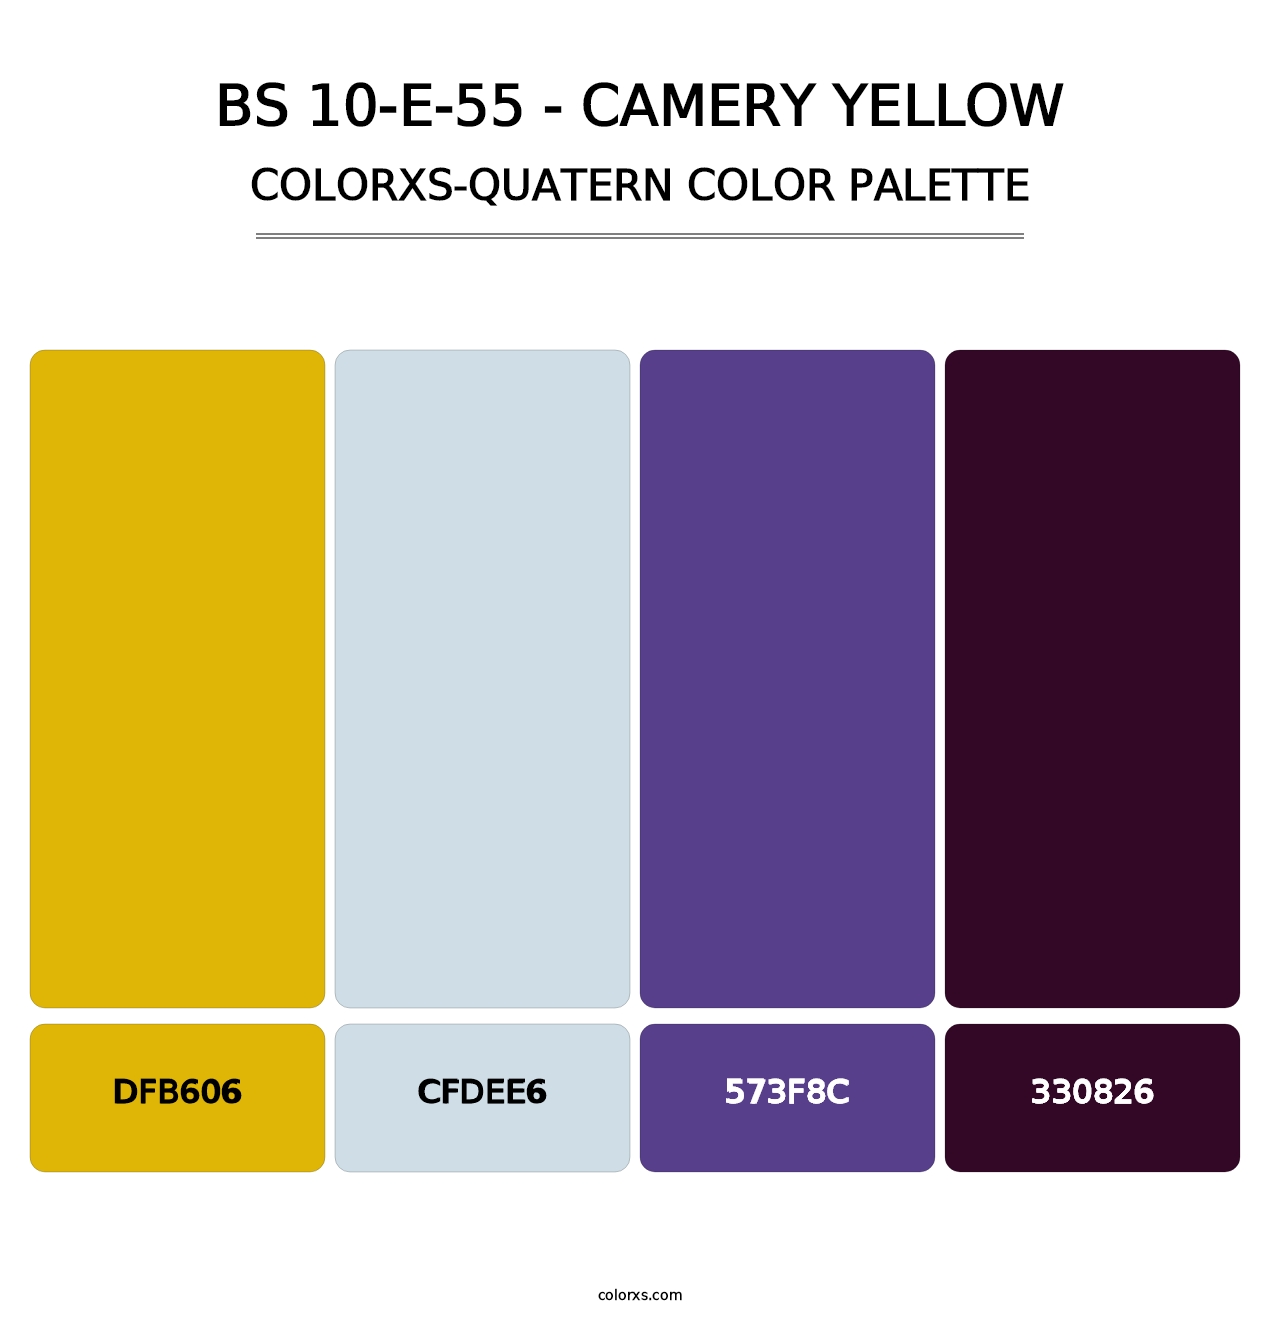 BS 10-E-55 - Camery Yellow - Colorxs Quatern Palette